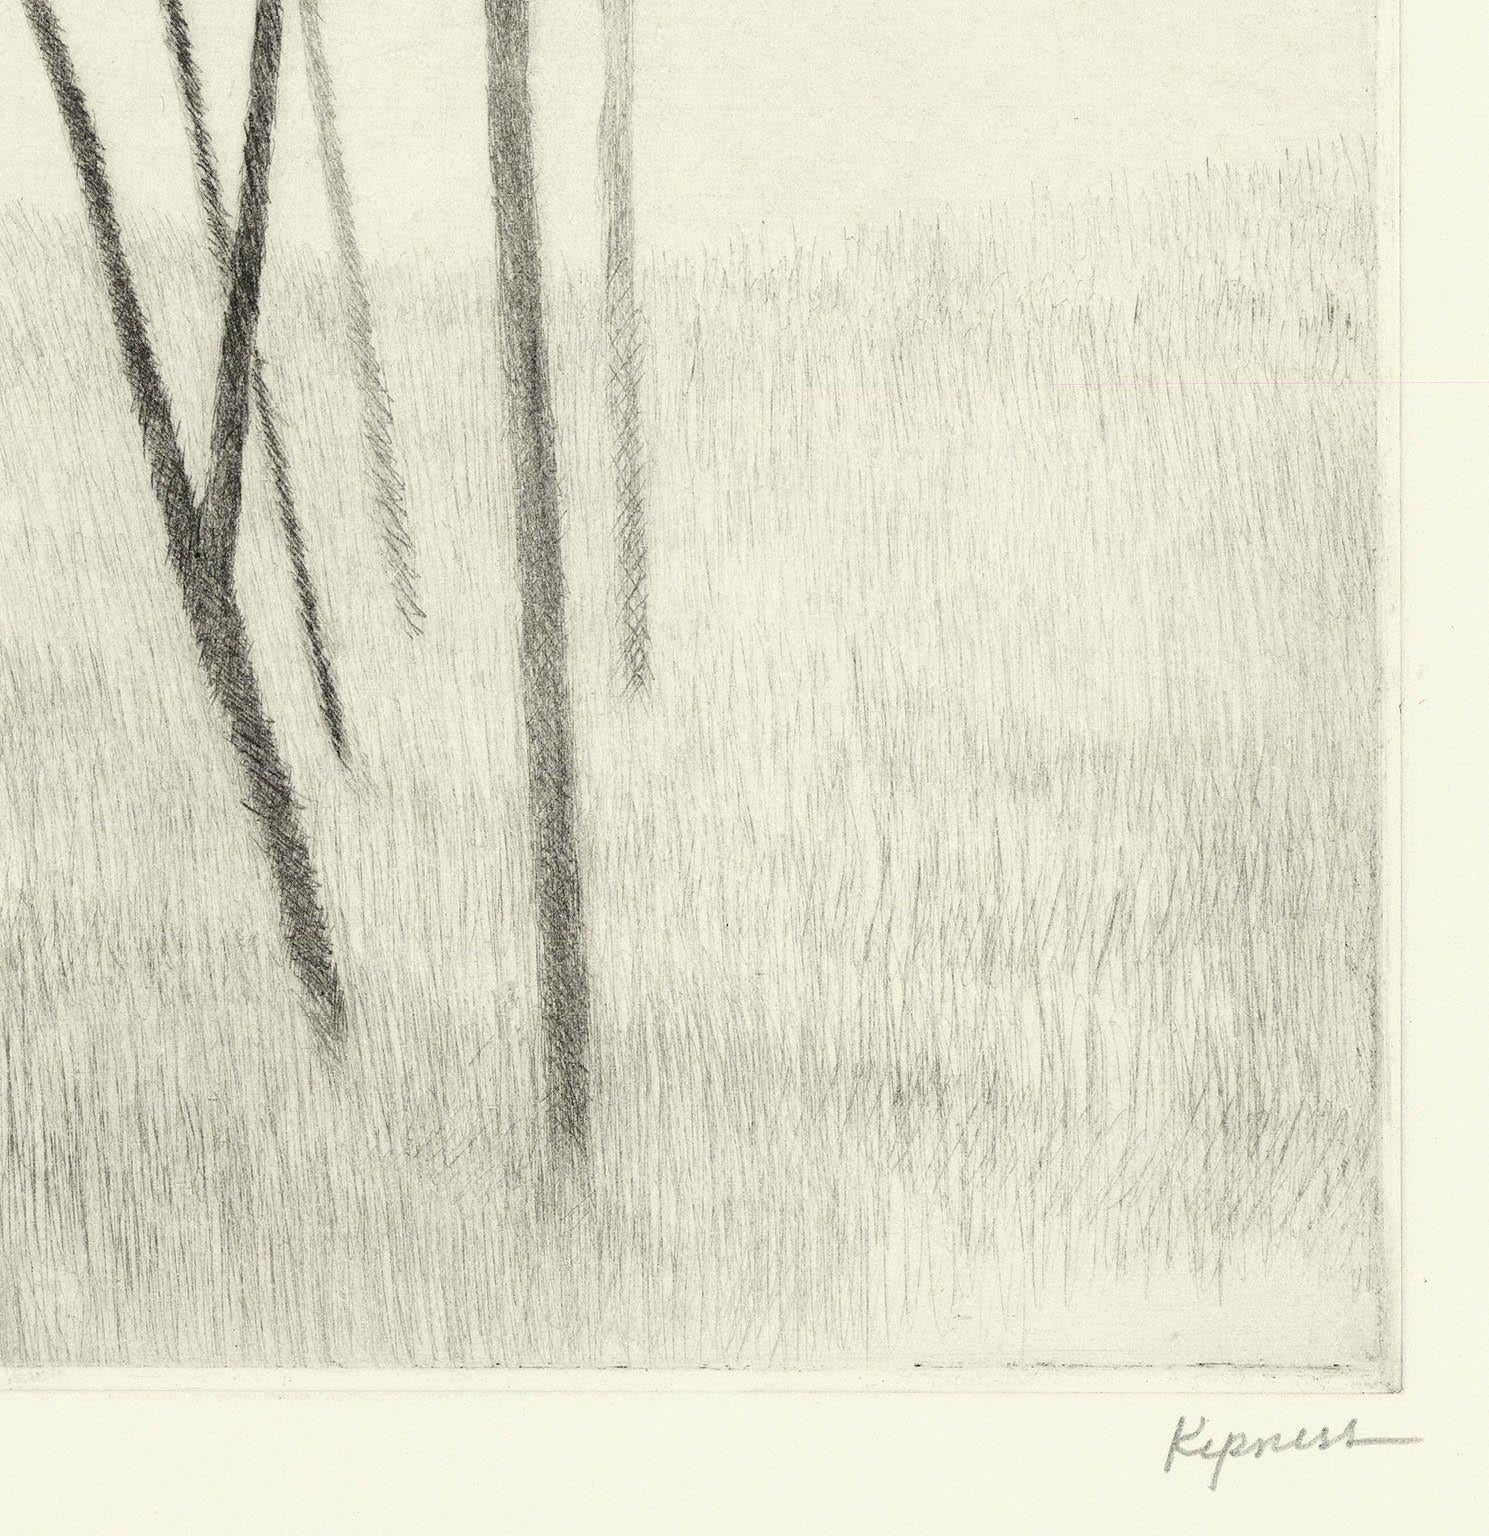 “Slope w/five trees” is a drypoint engraving created by Robert Kipniss in 2020. The paper size is 12.50 x 10.50 inches and the printed image size is 6.75 x 6 inches. This impression is signed in pencil and inscribed 